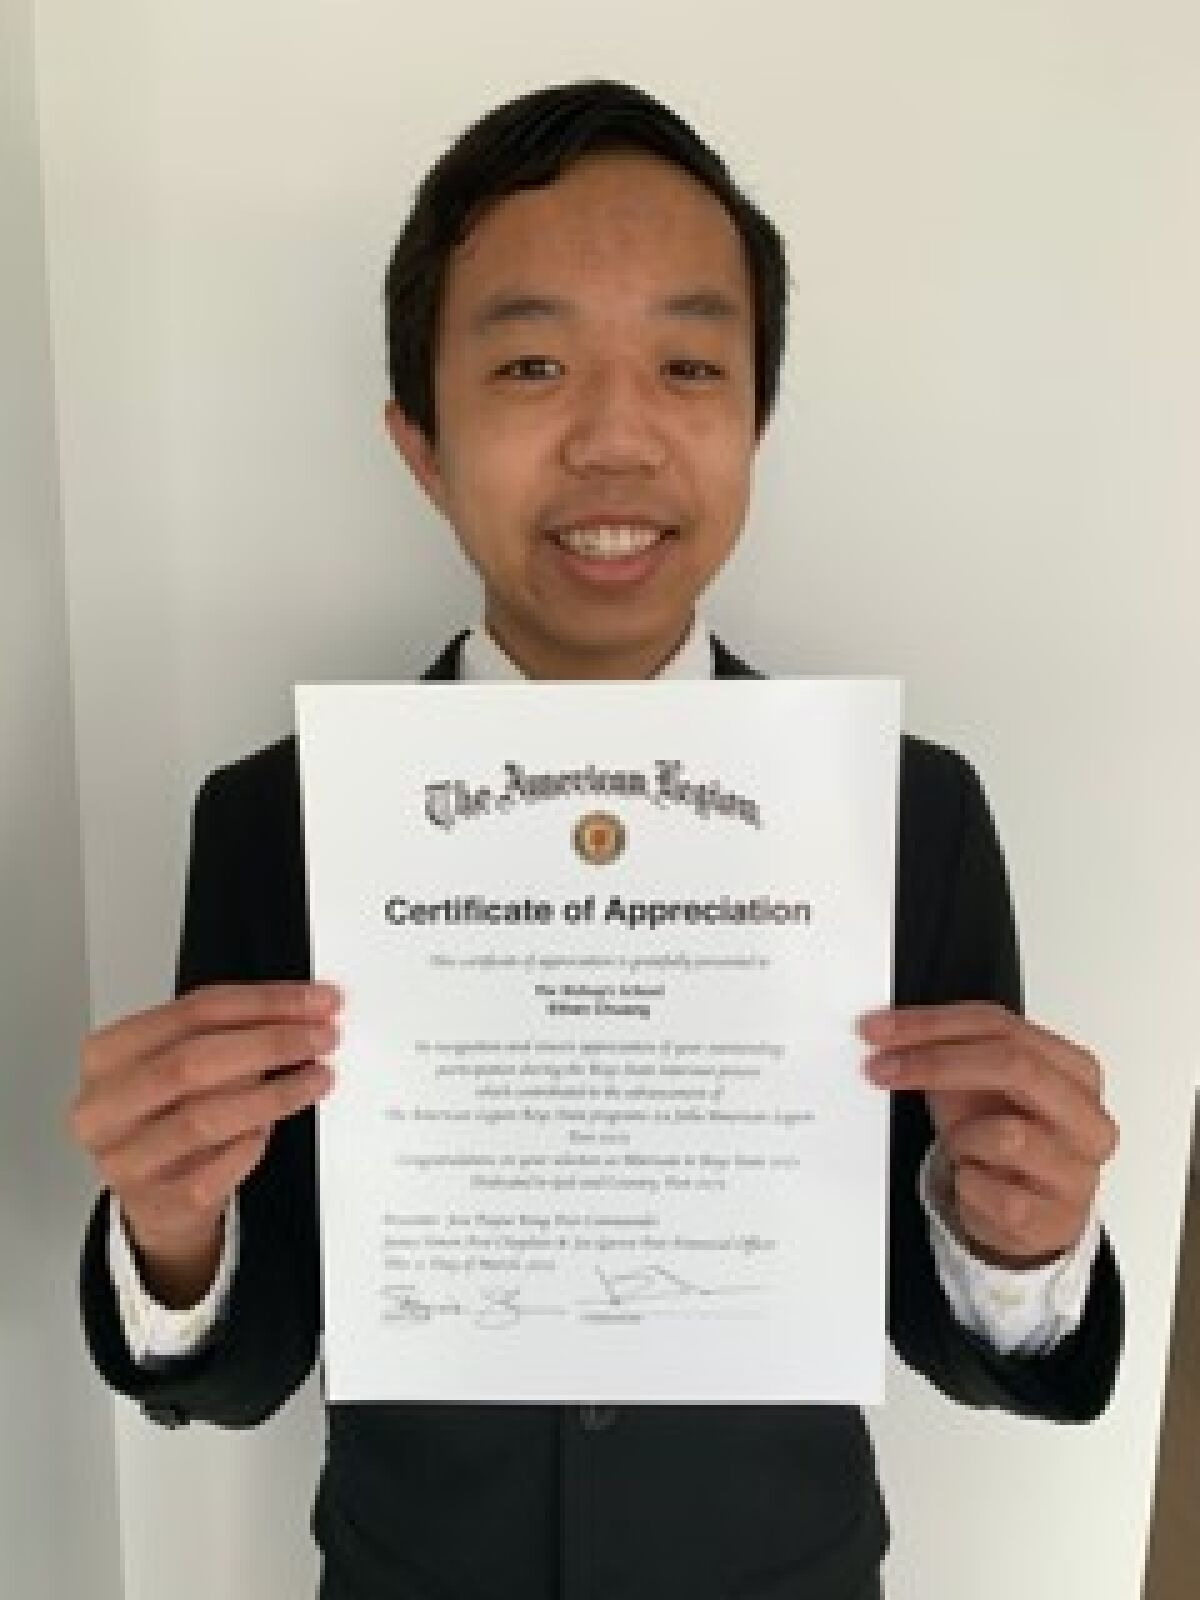 The Bishop’s School student Ethan Chuang will join seven other La Jolla students at the upcoming American Legion Boys State.